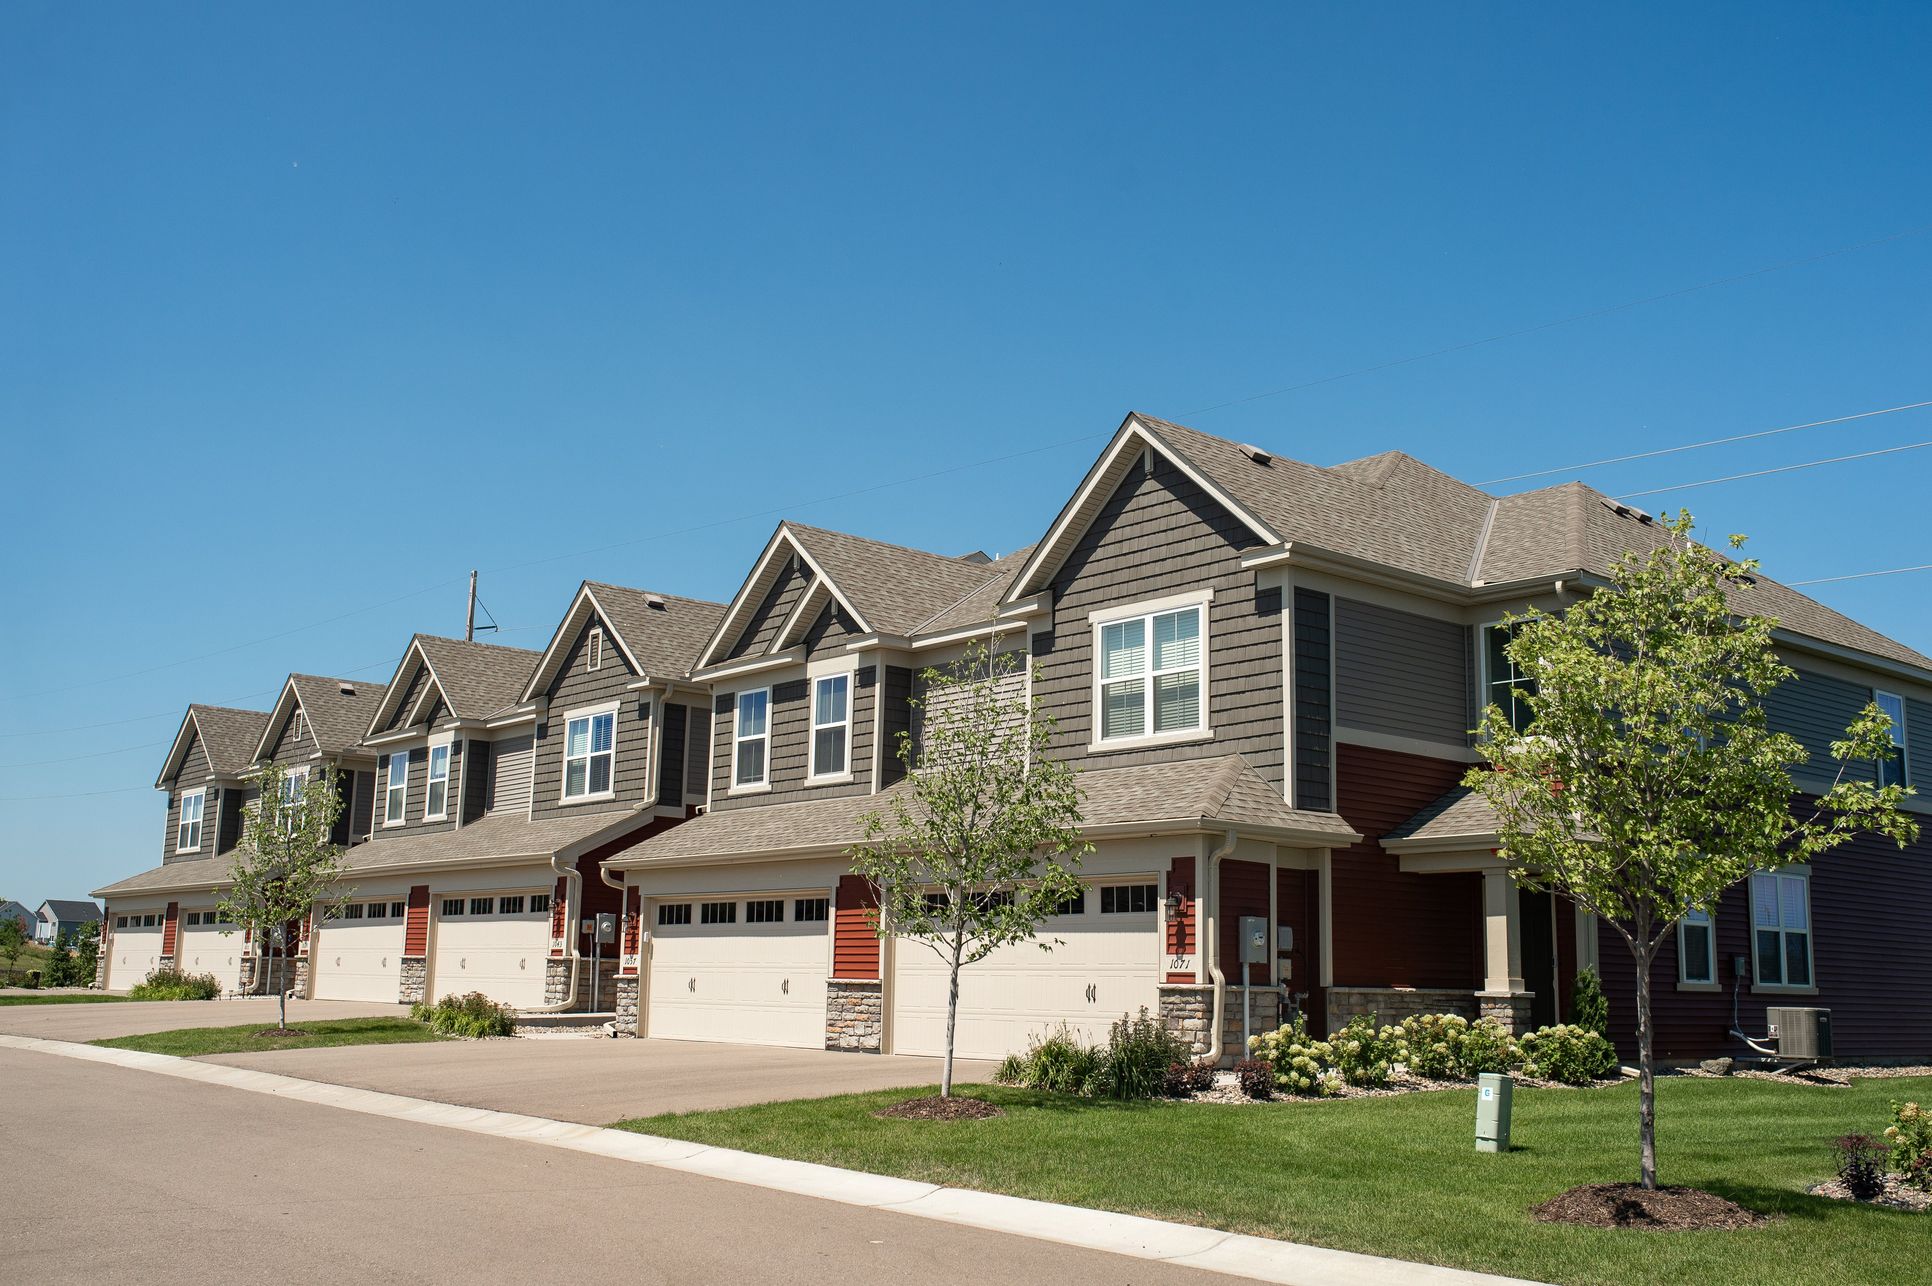 IMAGE: Townhomes for sale in Waconia, MN